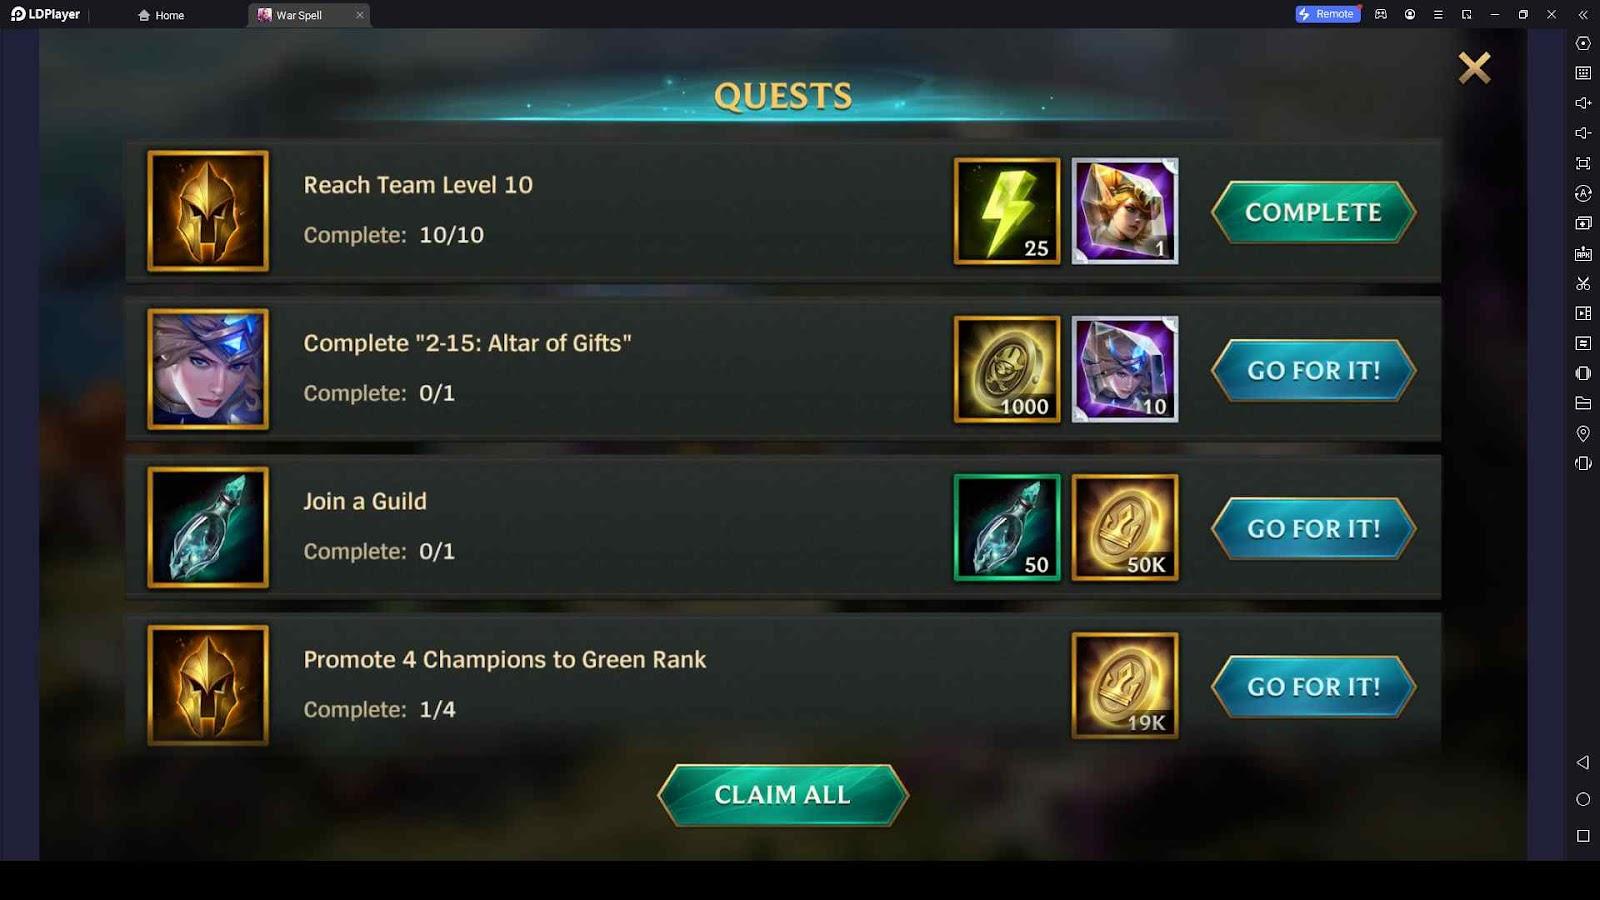 Completion of Daily Quests and Battle Pass Feats